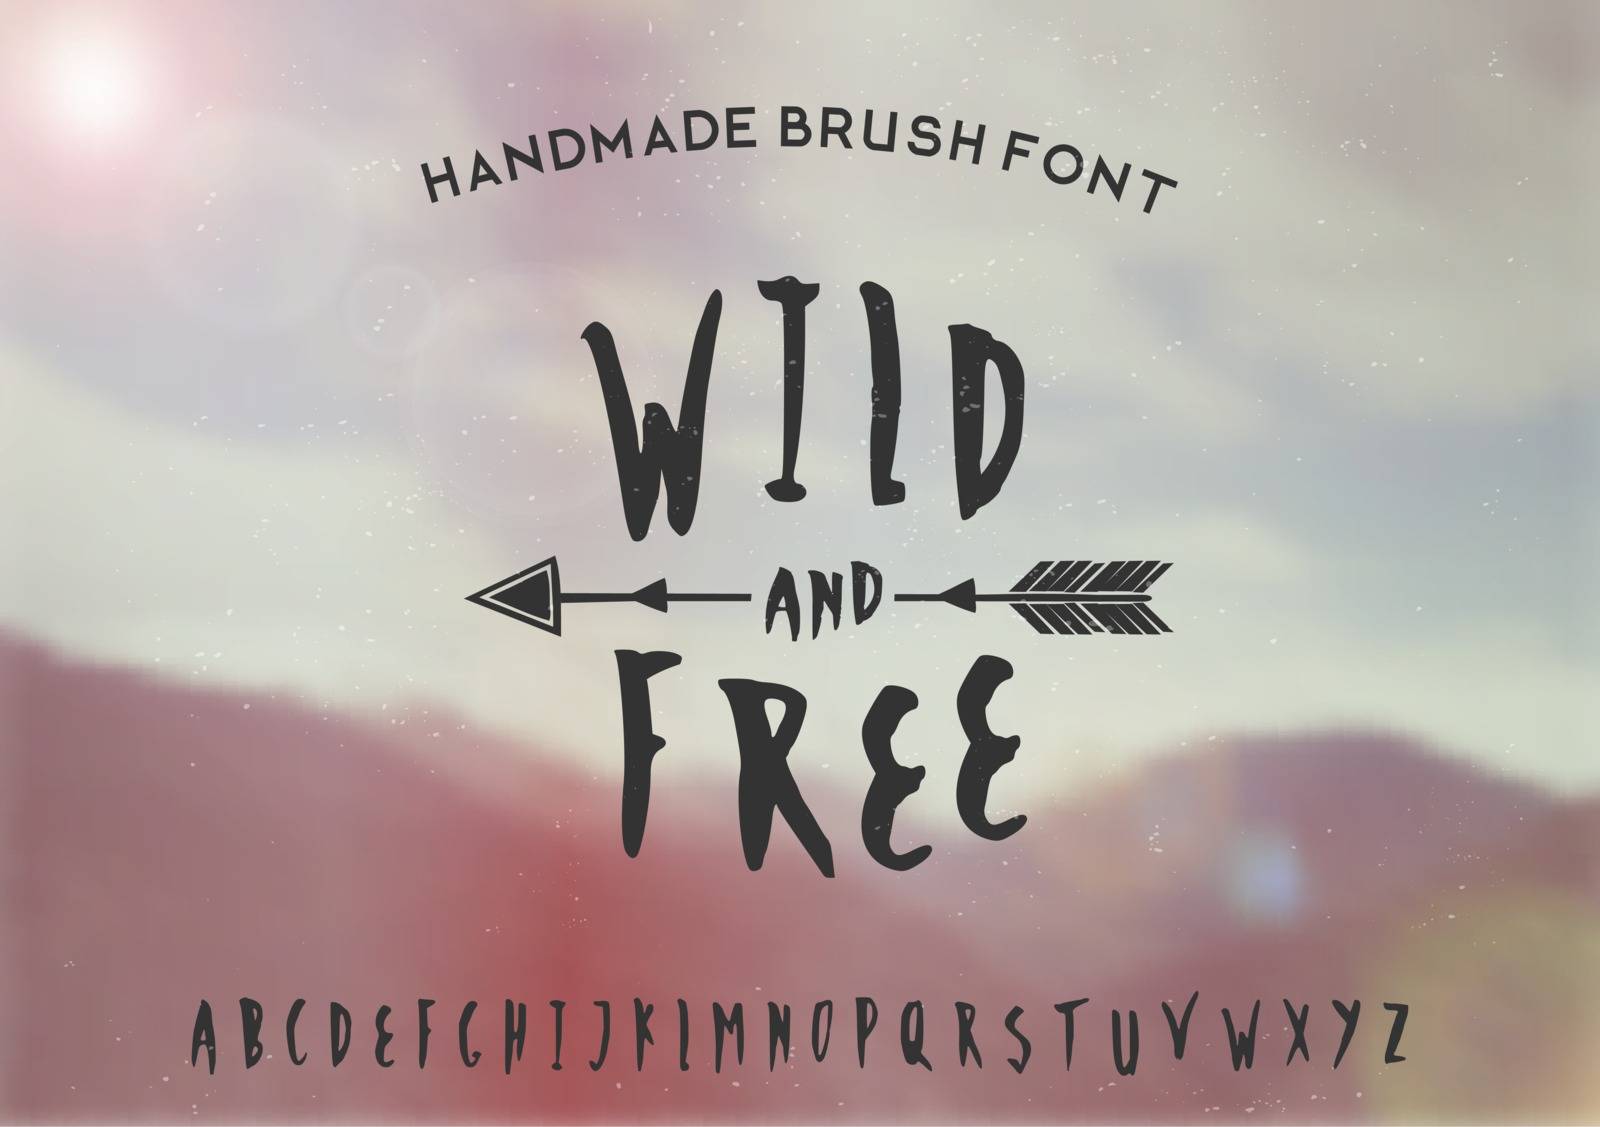 Hand drawn brush font on a blurred vintage style mountain view background. EPS 10 file, gradient mesh and transparency effects used.